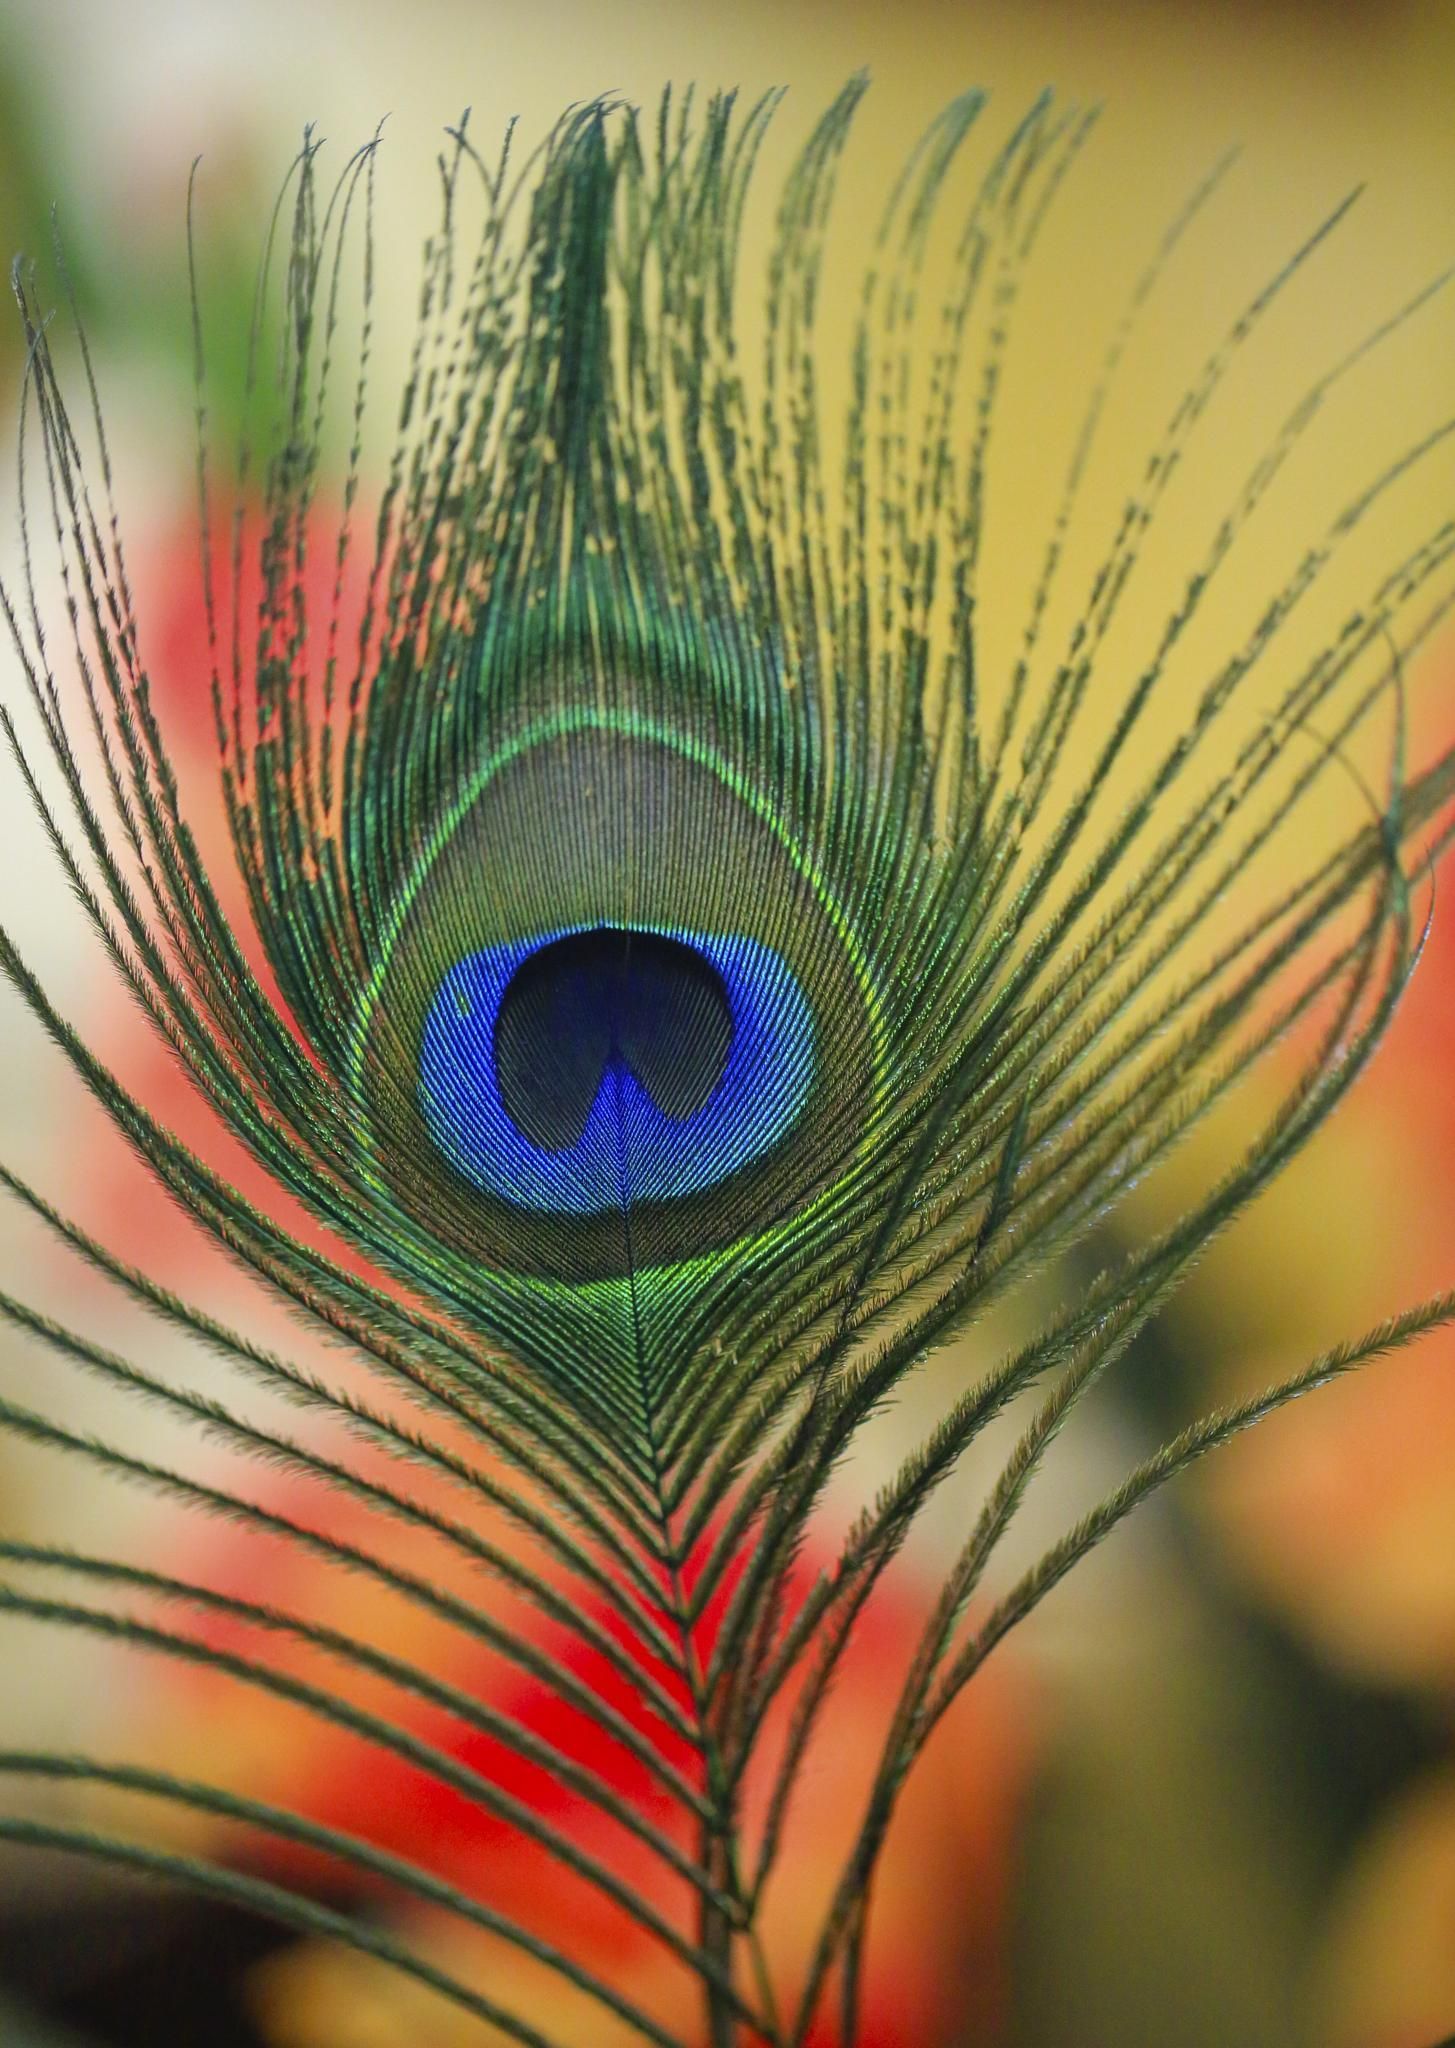 Feathered by leigh.lofgren. Krishna picture, Peacock feather art, Peacock image